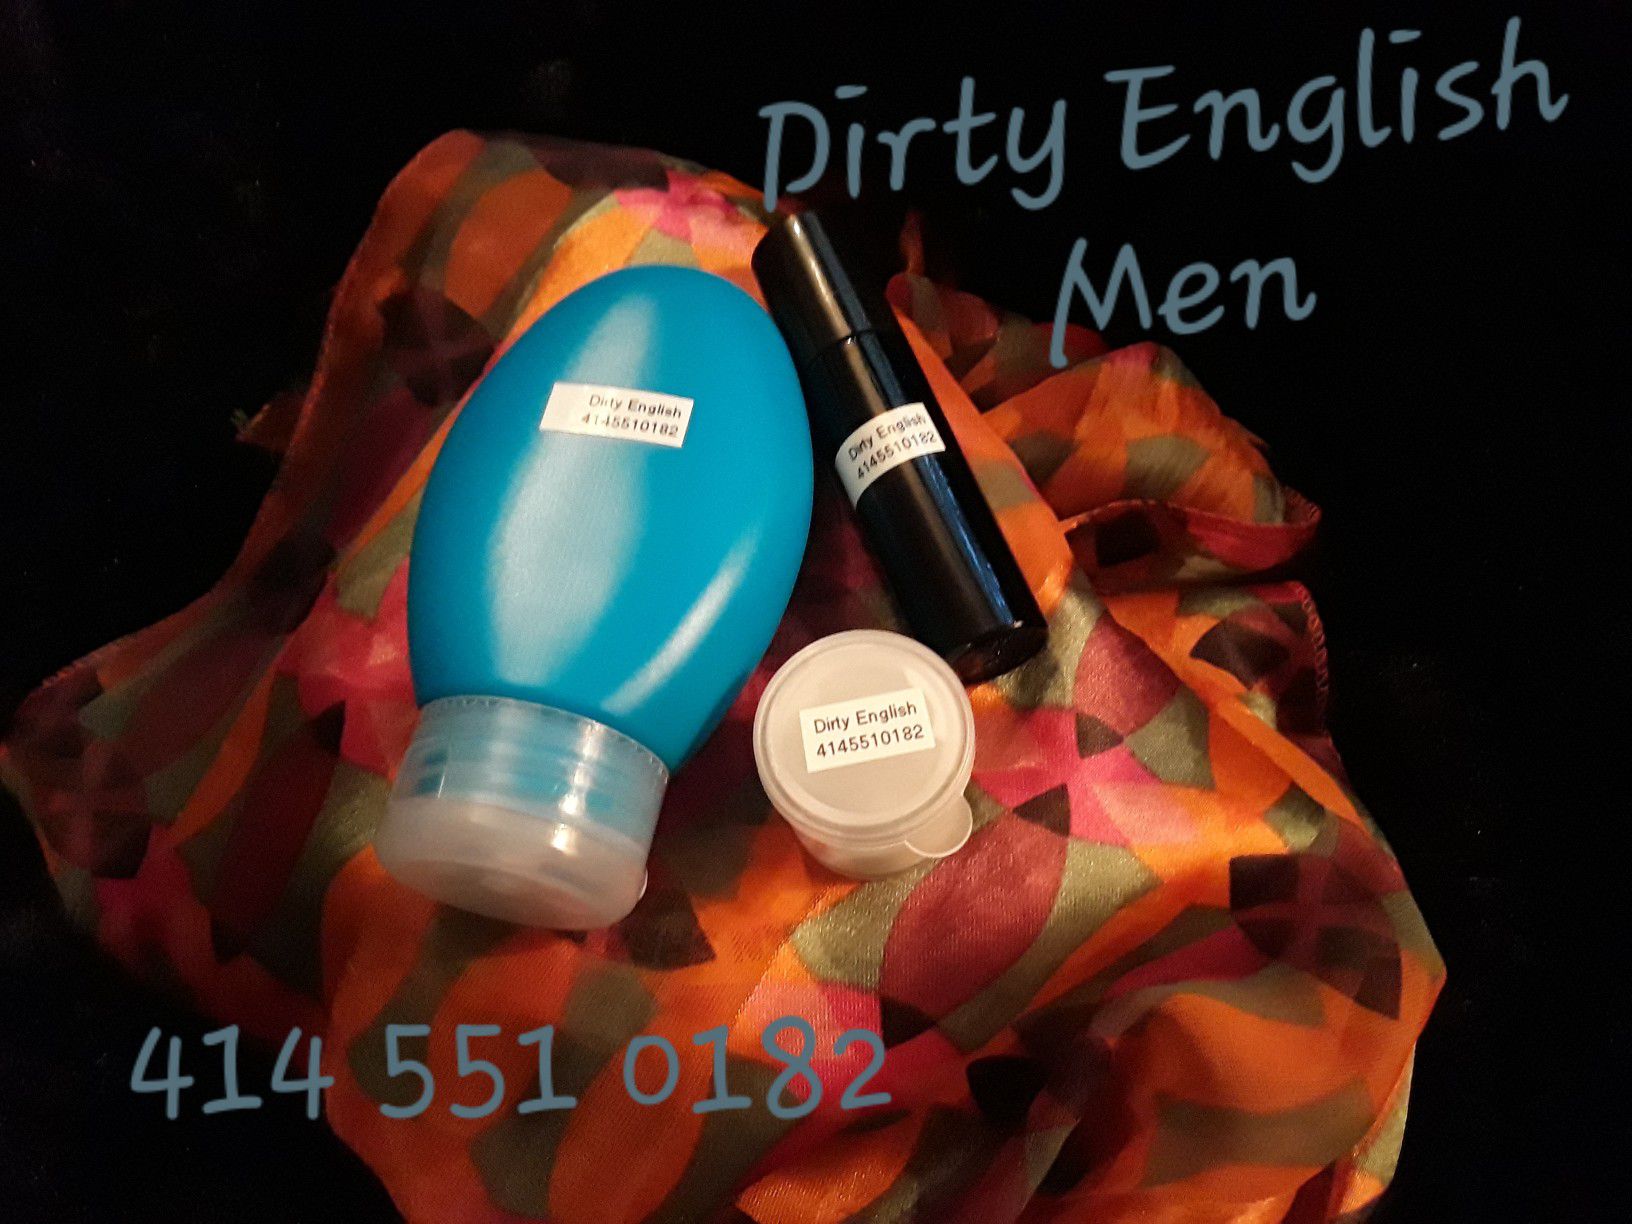 Fathers Day Gifts. Fragrance Oil and Lotion Sets. Dirty English and more